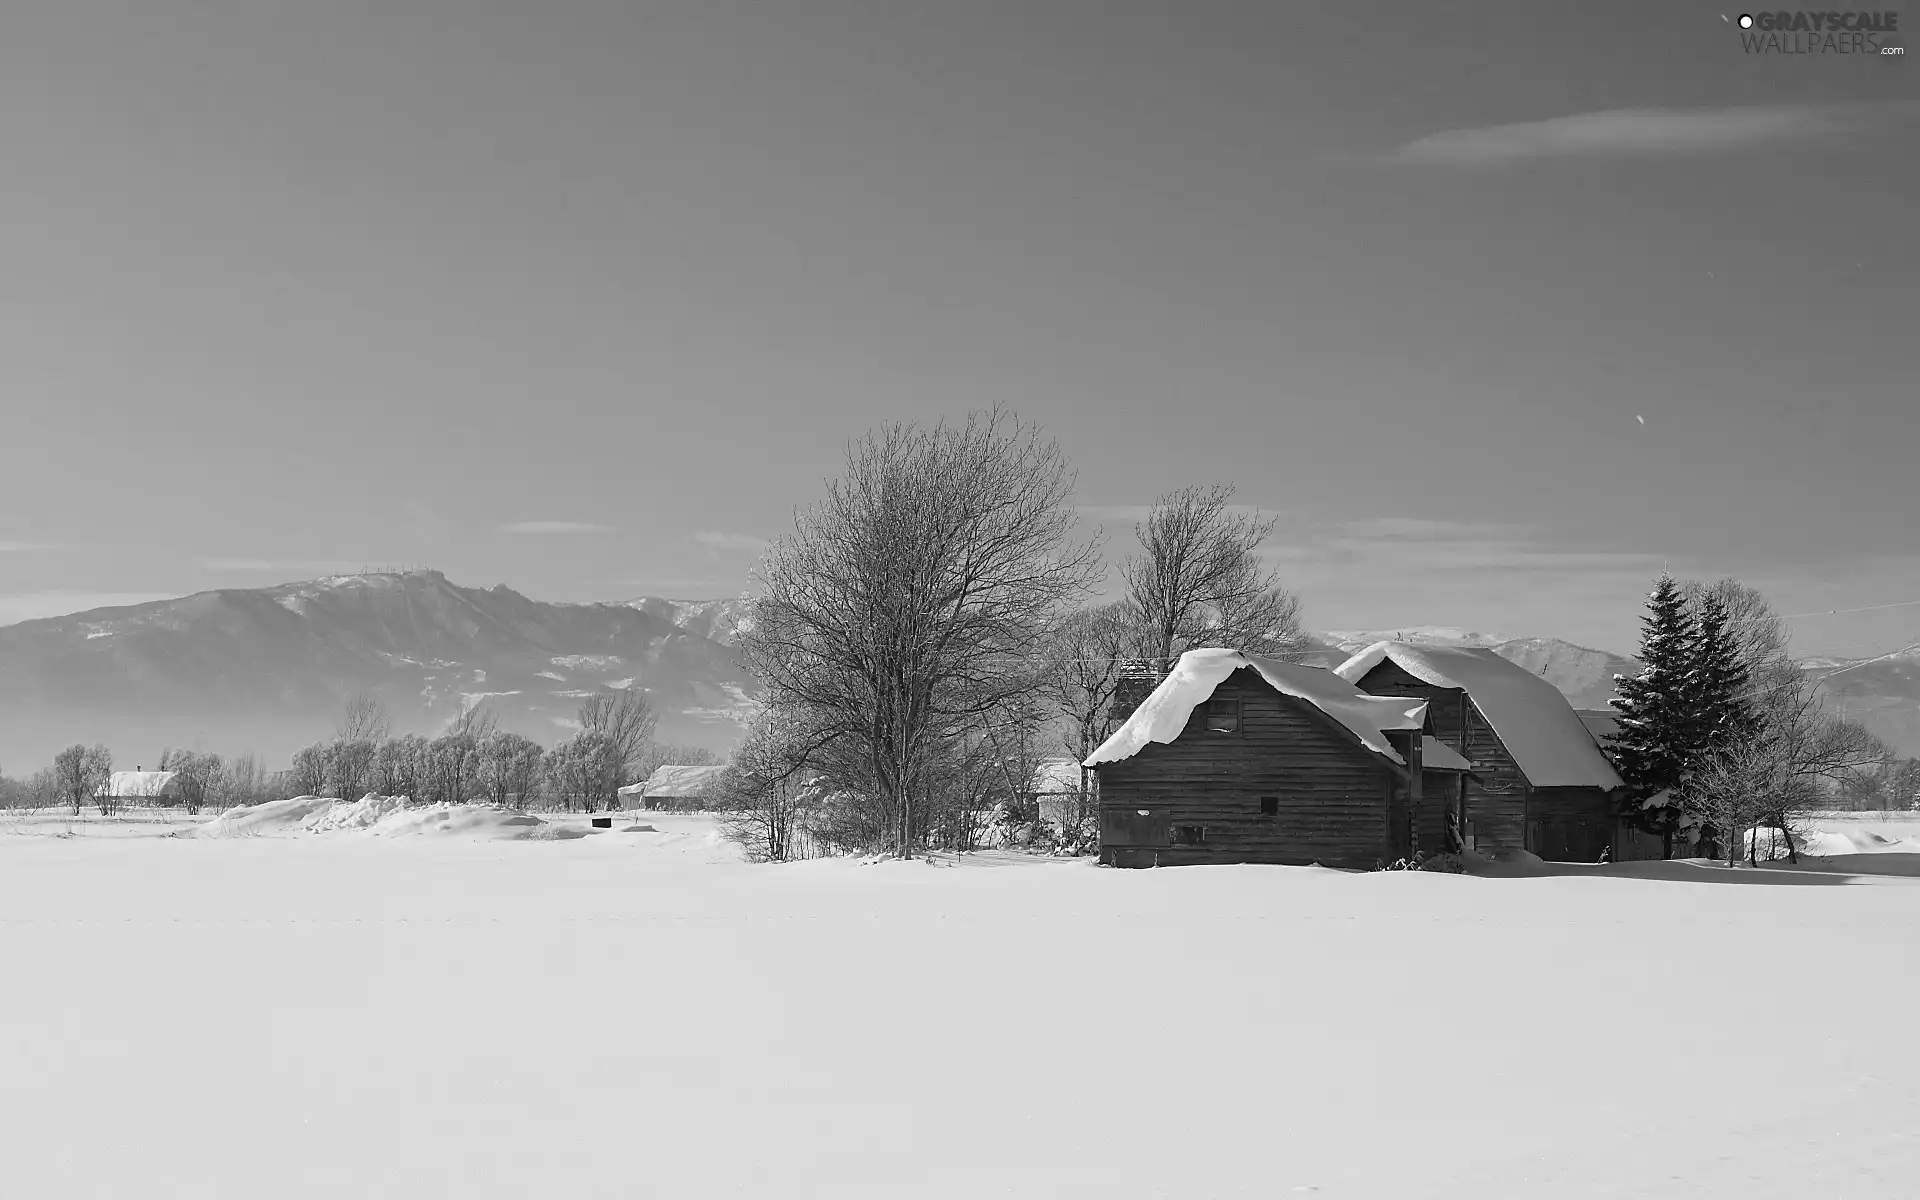 field, Mountains, winter, Houses